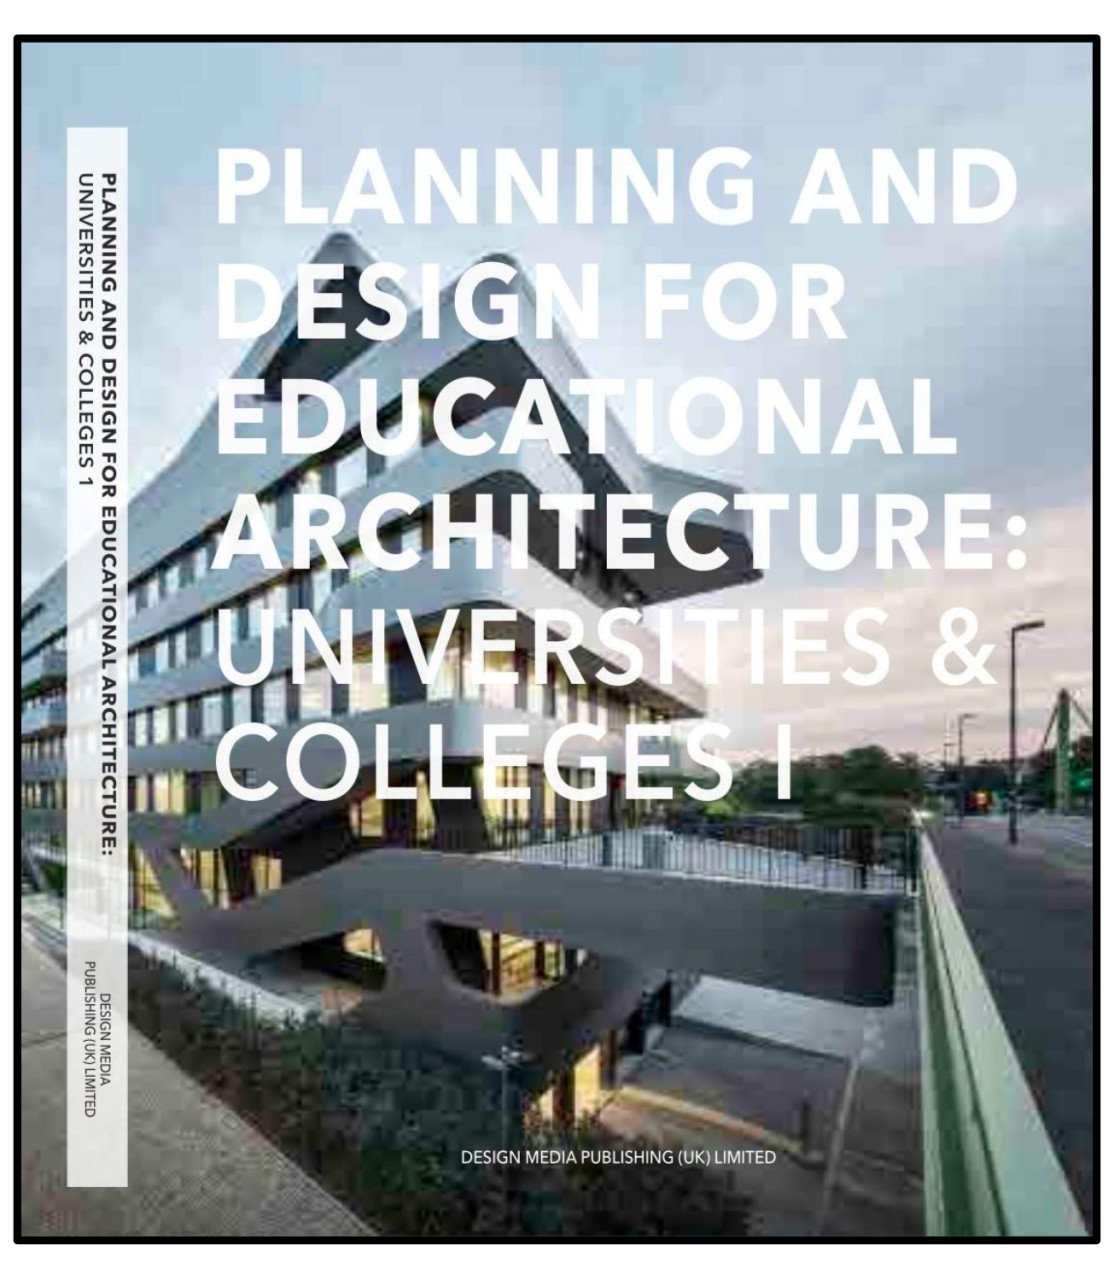 PLANNING AND DESIGN FOR EDUCATIONAL ARCHITECTURE: UNIVERSITIES & COLLEGES